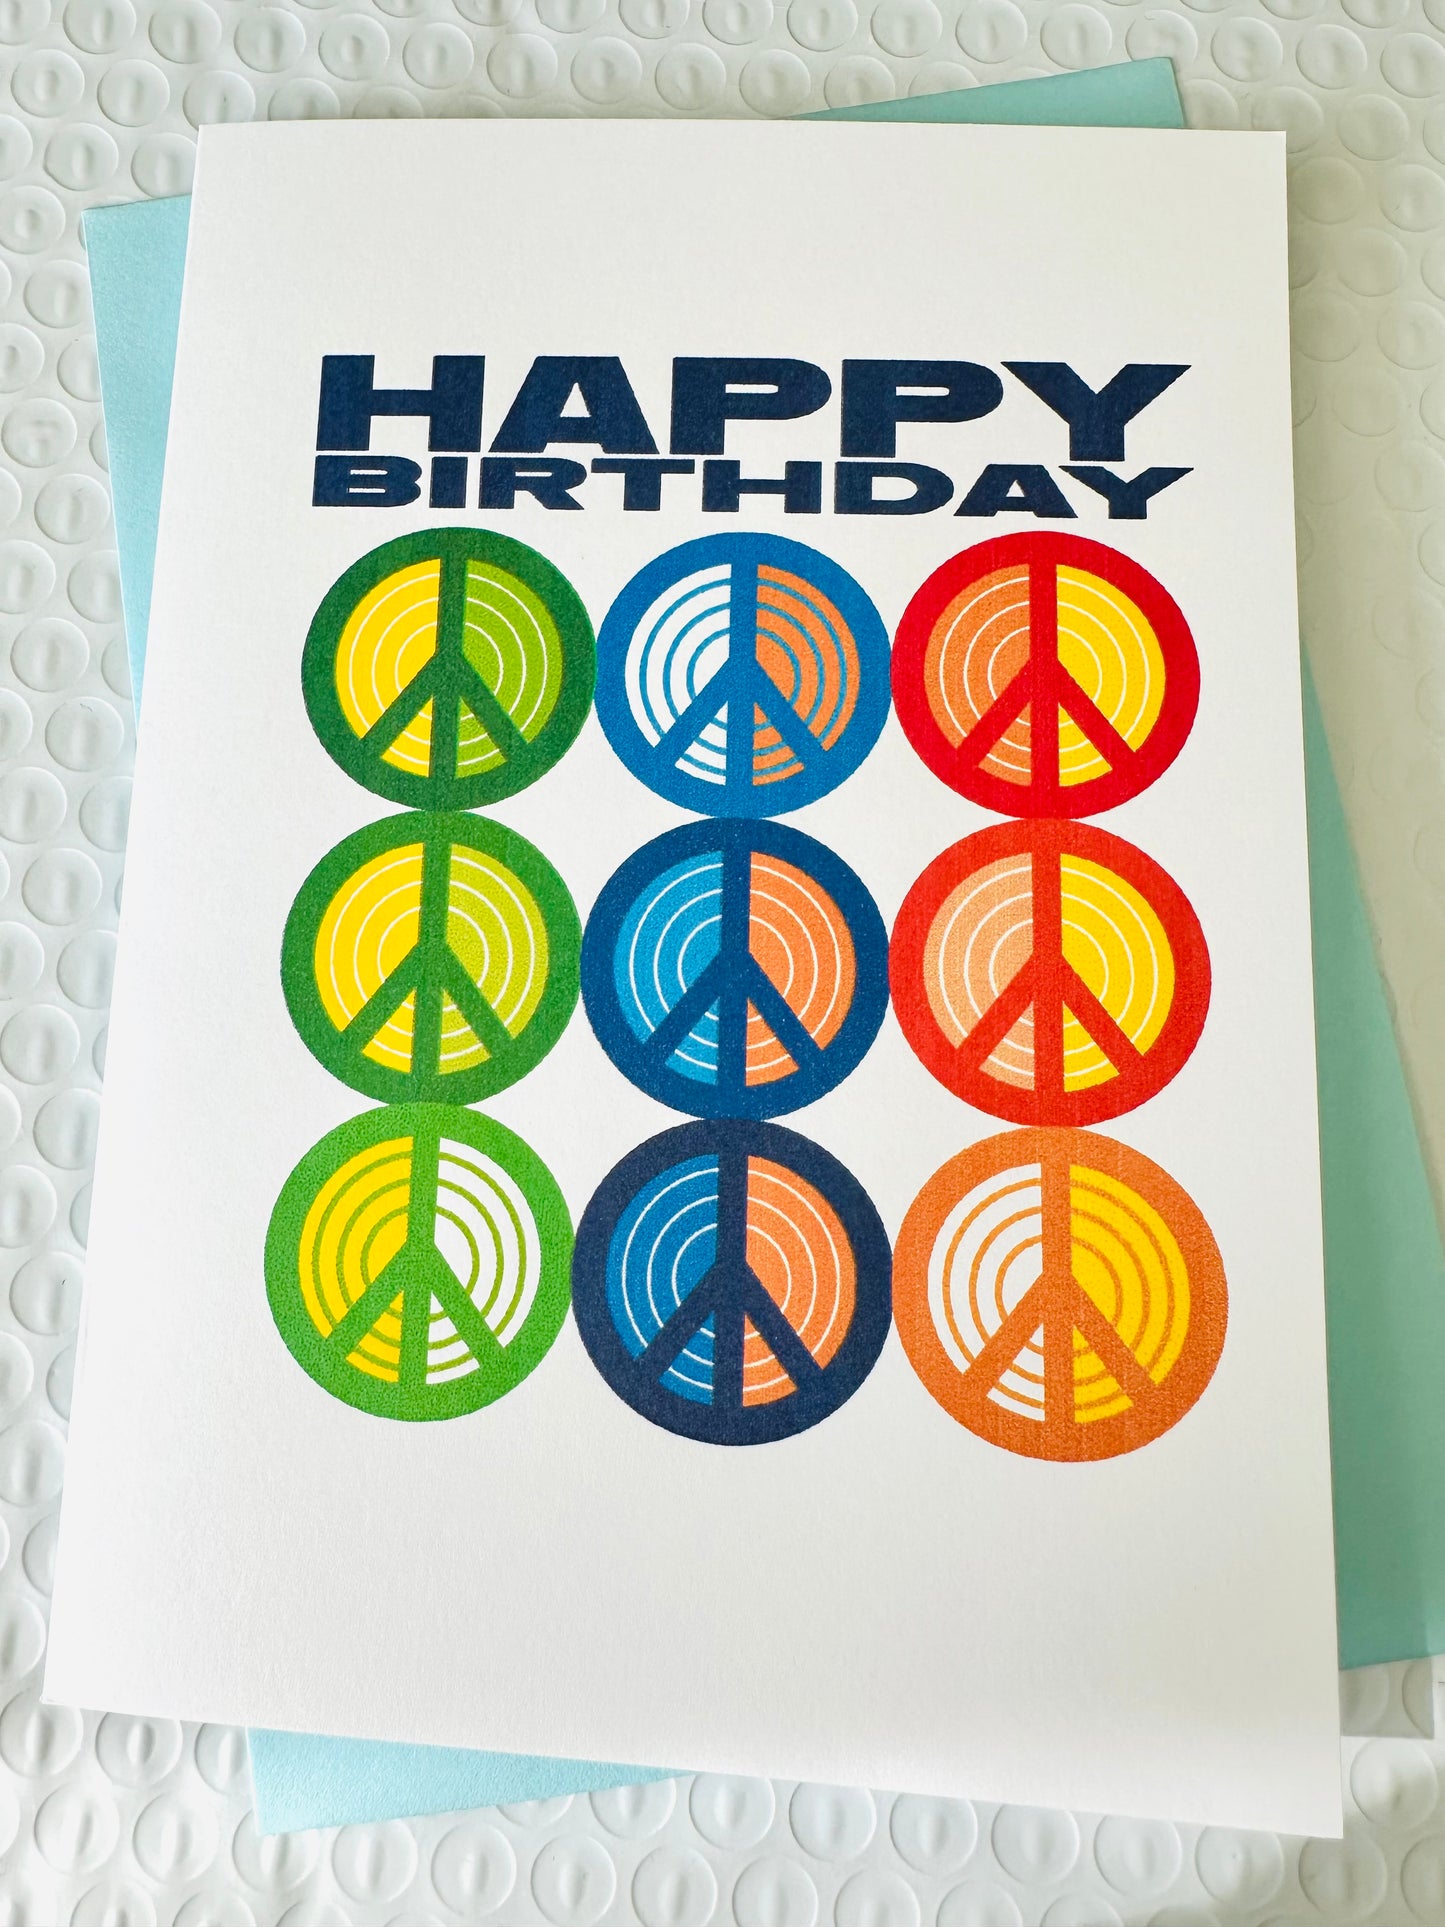 Happy Birthday & HBD Vibes! 70's inspired Multi Peace sign Greeting card 5x7 blank inside